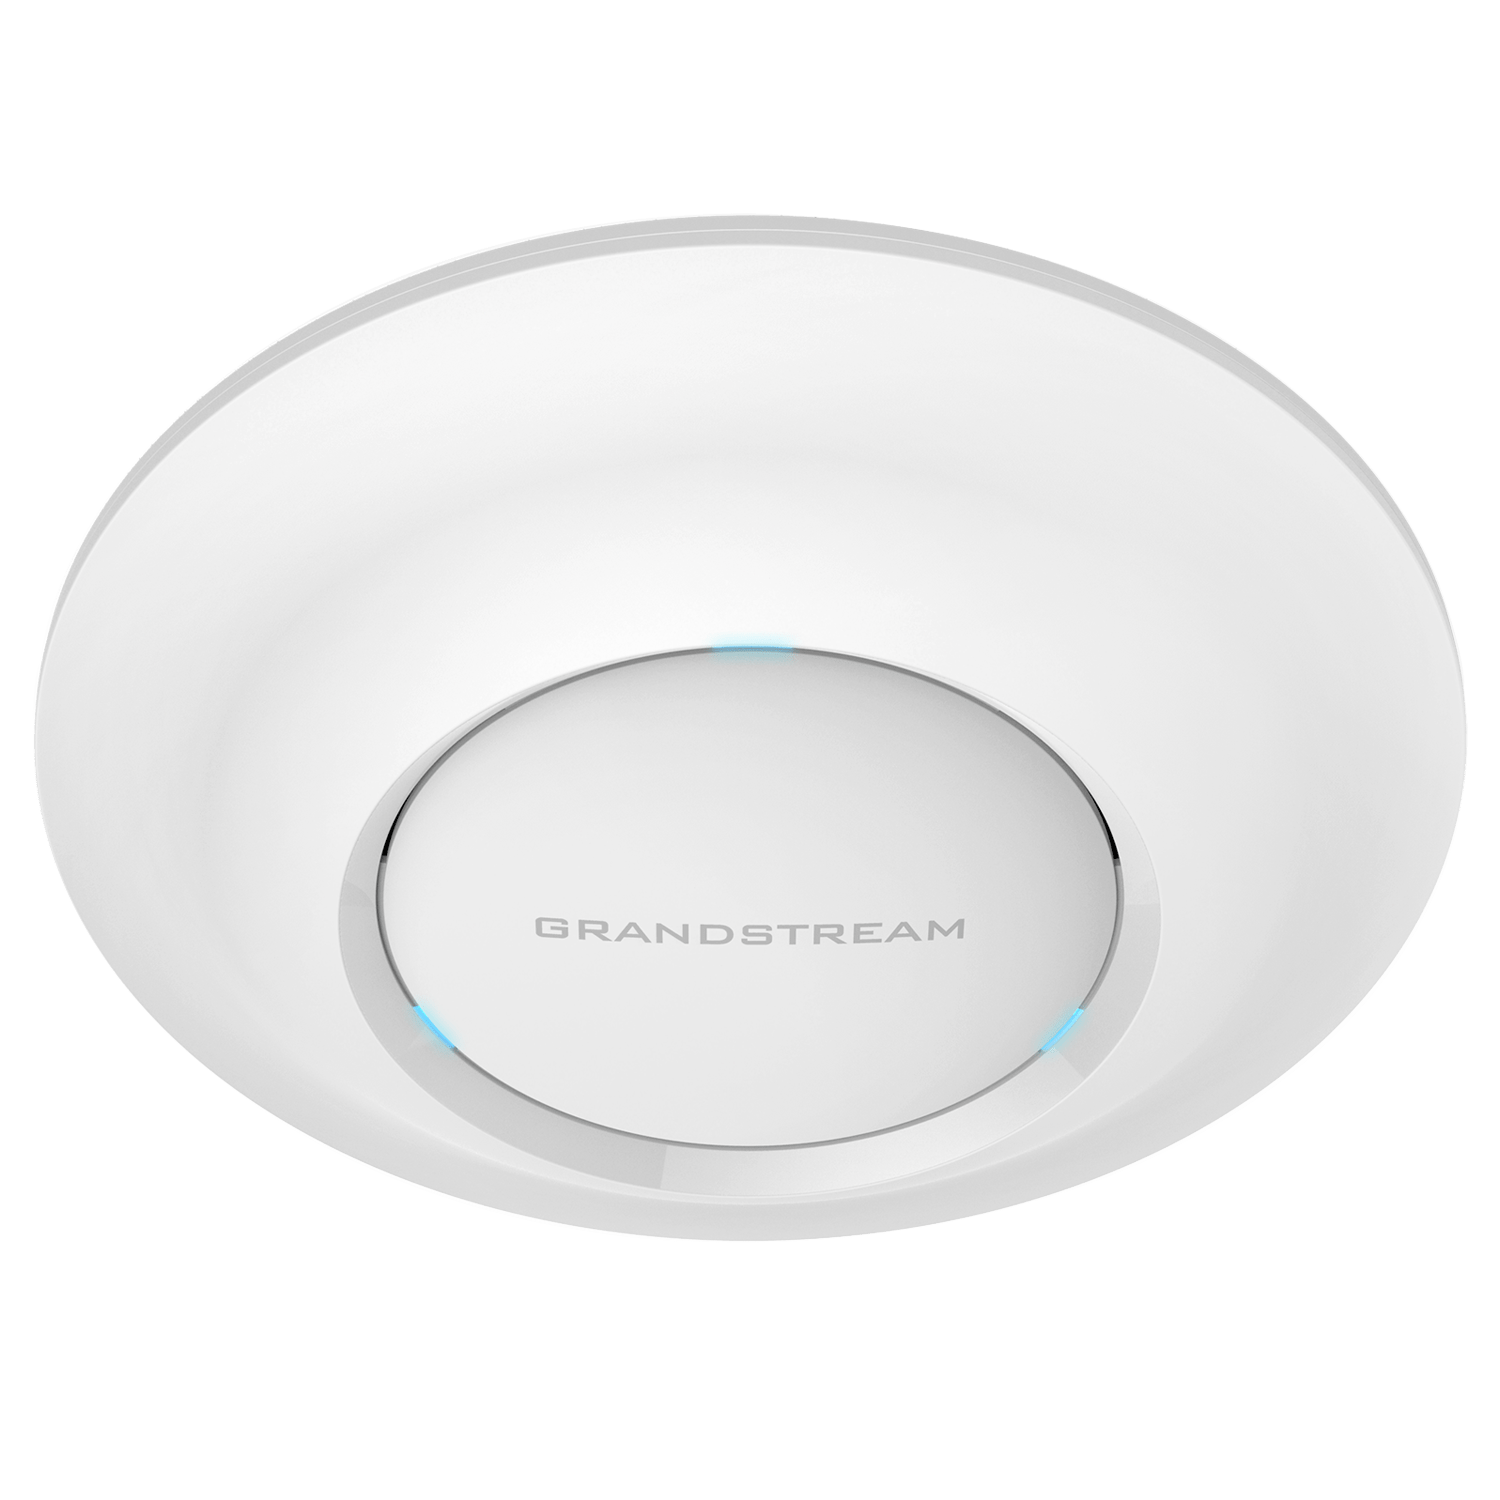 image of the high-performance wireless access point for business communication - grandstream